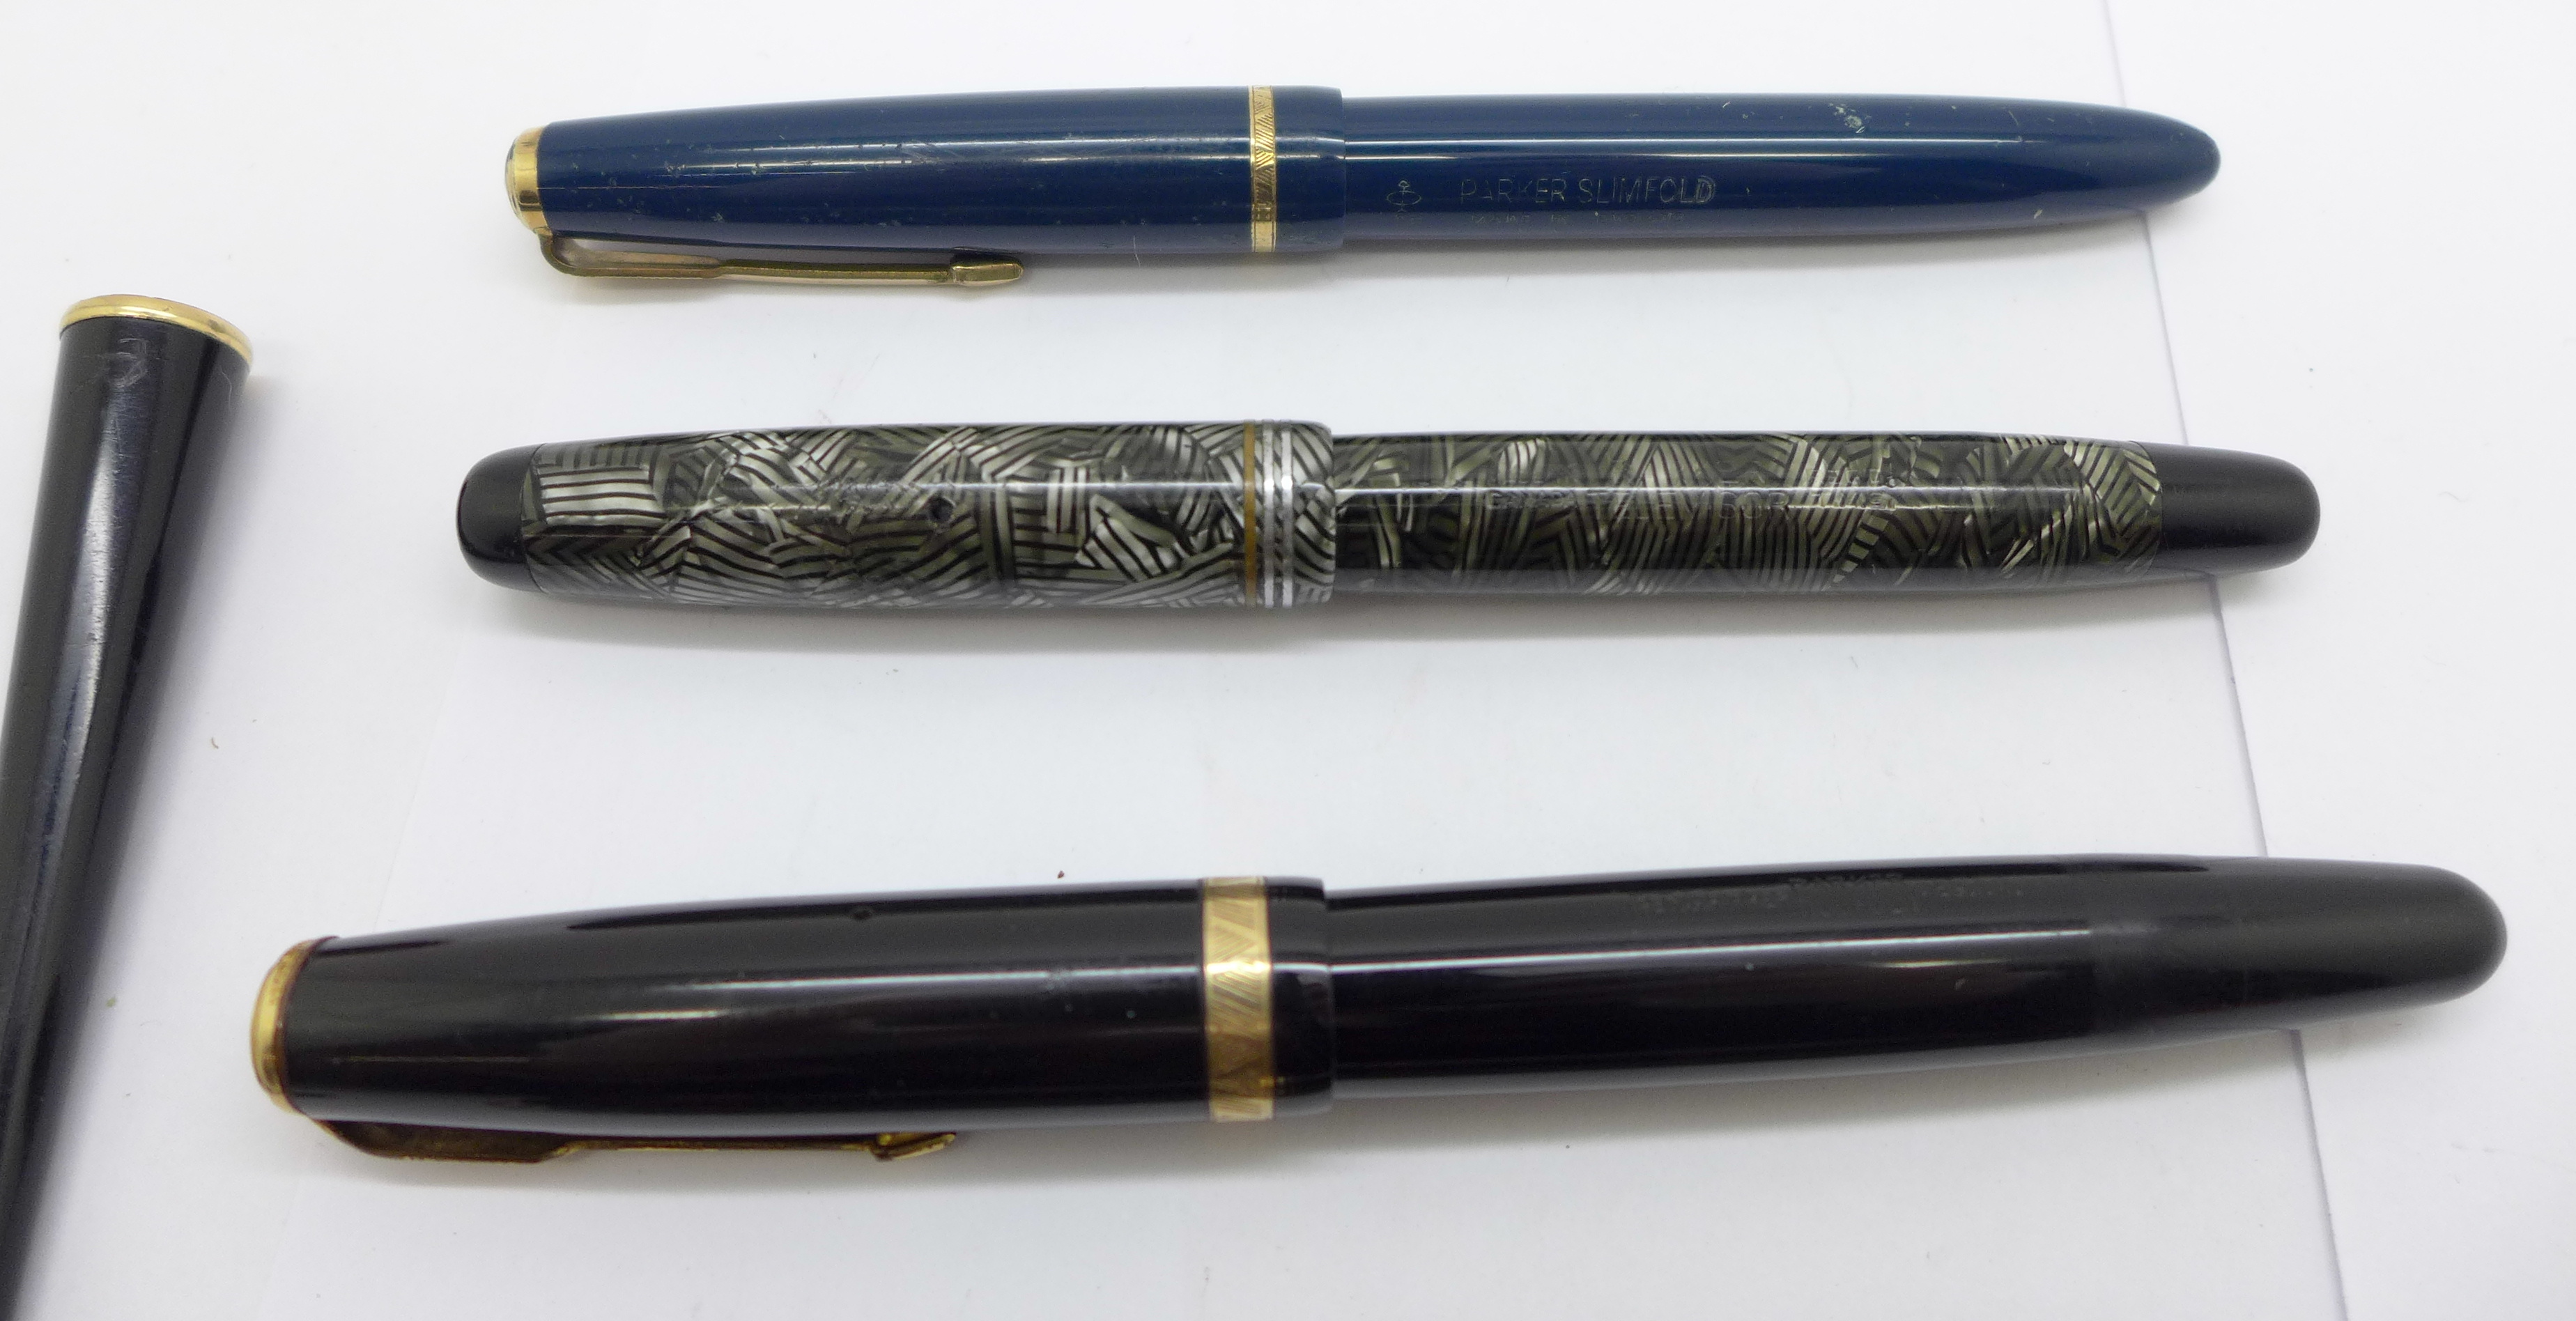 Five Parker pens; Televisor, Slimfold, Duofold, one pocket pen and a Duofold desk pen, three with - Bild 2 aus 5